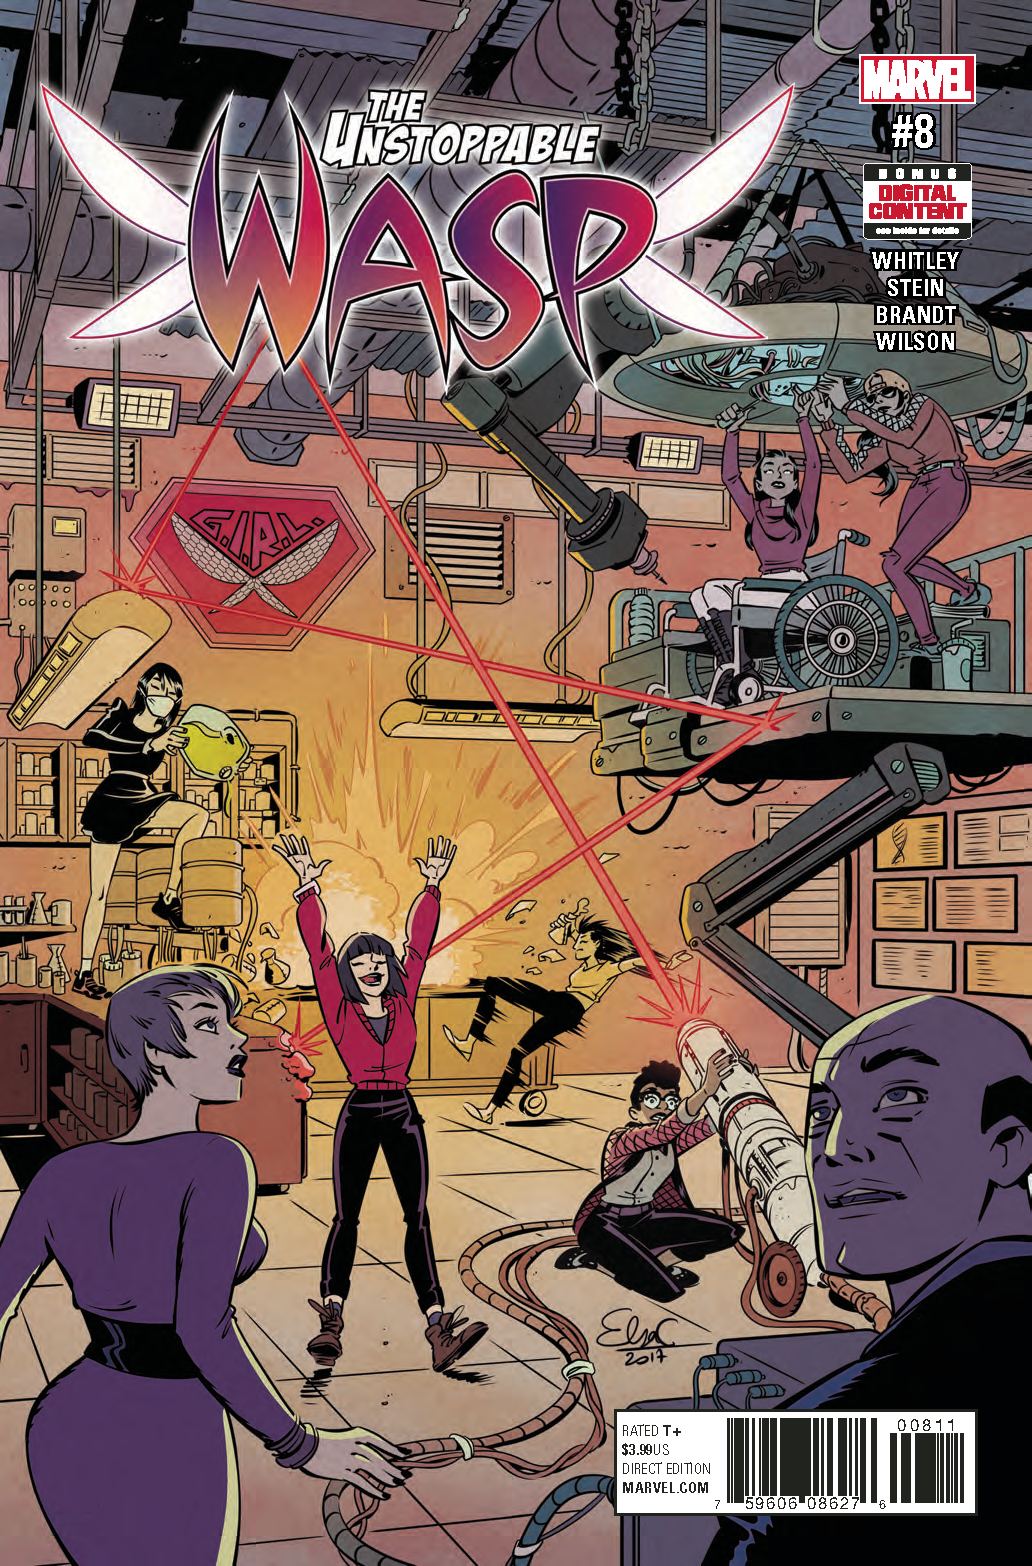 UNSTOPPABLE WASP #8